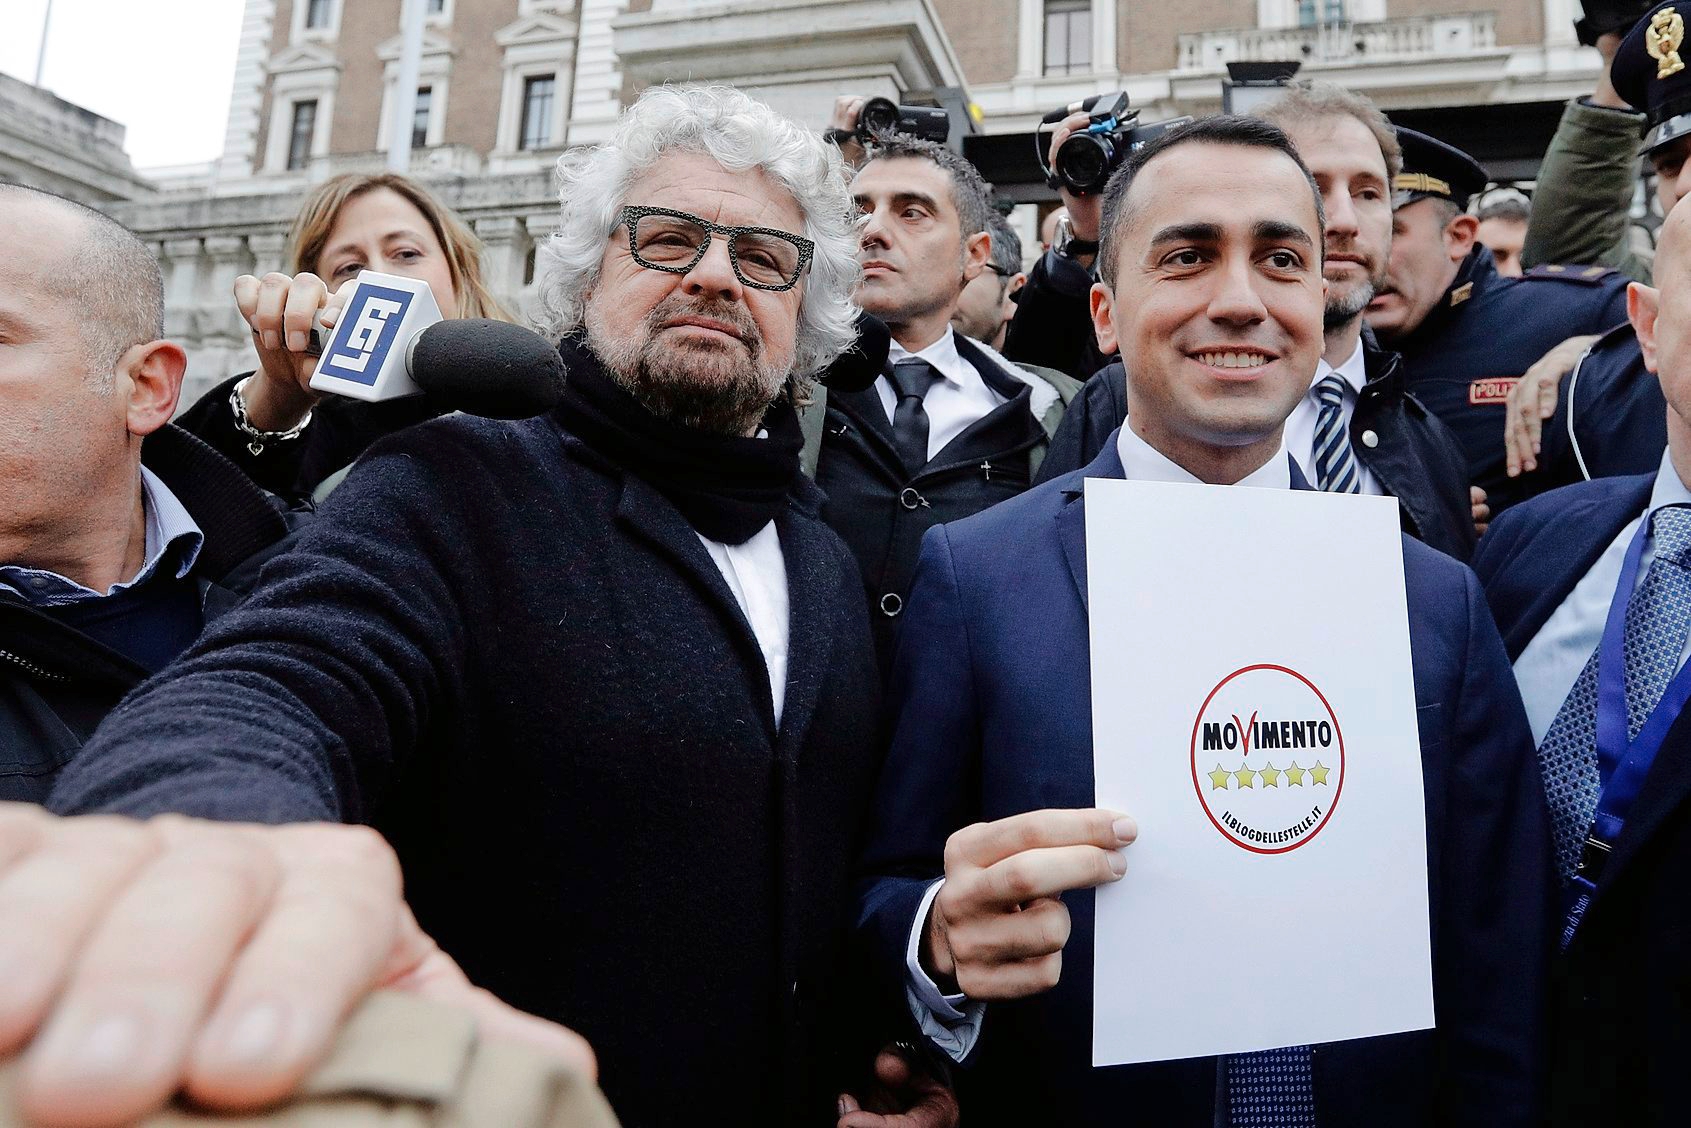 5-Star Movement party lawmaker Luigi Di Maio, center, flanked by movement founders Beppe Grillo, left, and Davide Casaleggio, right, holds the official party symbol which they registered for the upcoming elections, outside the Italian Interior Ministry building, in Rome, Friday, Jan. 19, 2018. Italians vote March 4 in a parliamentary election, the vote is shaping up into a three way race between a weakened Democratic Party, the populist 5-Star Movement and the center-right, with Salvini's League vying for dominance with former Premier Silvio Berlusconi's Forza Italia. (AP Photo/Gregorio Borgia) Italy Elections